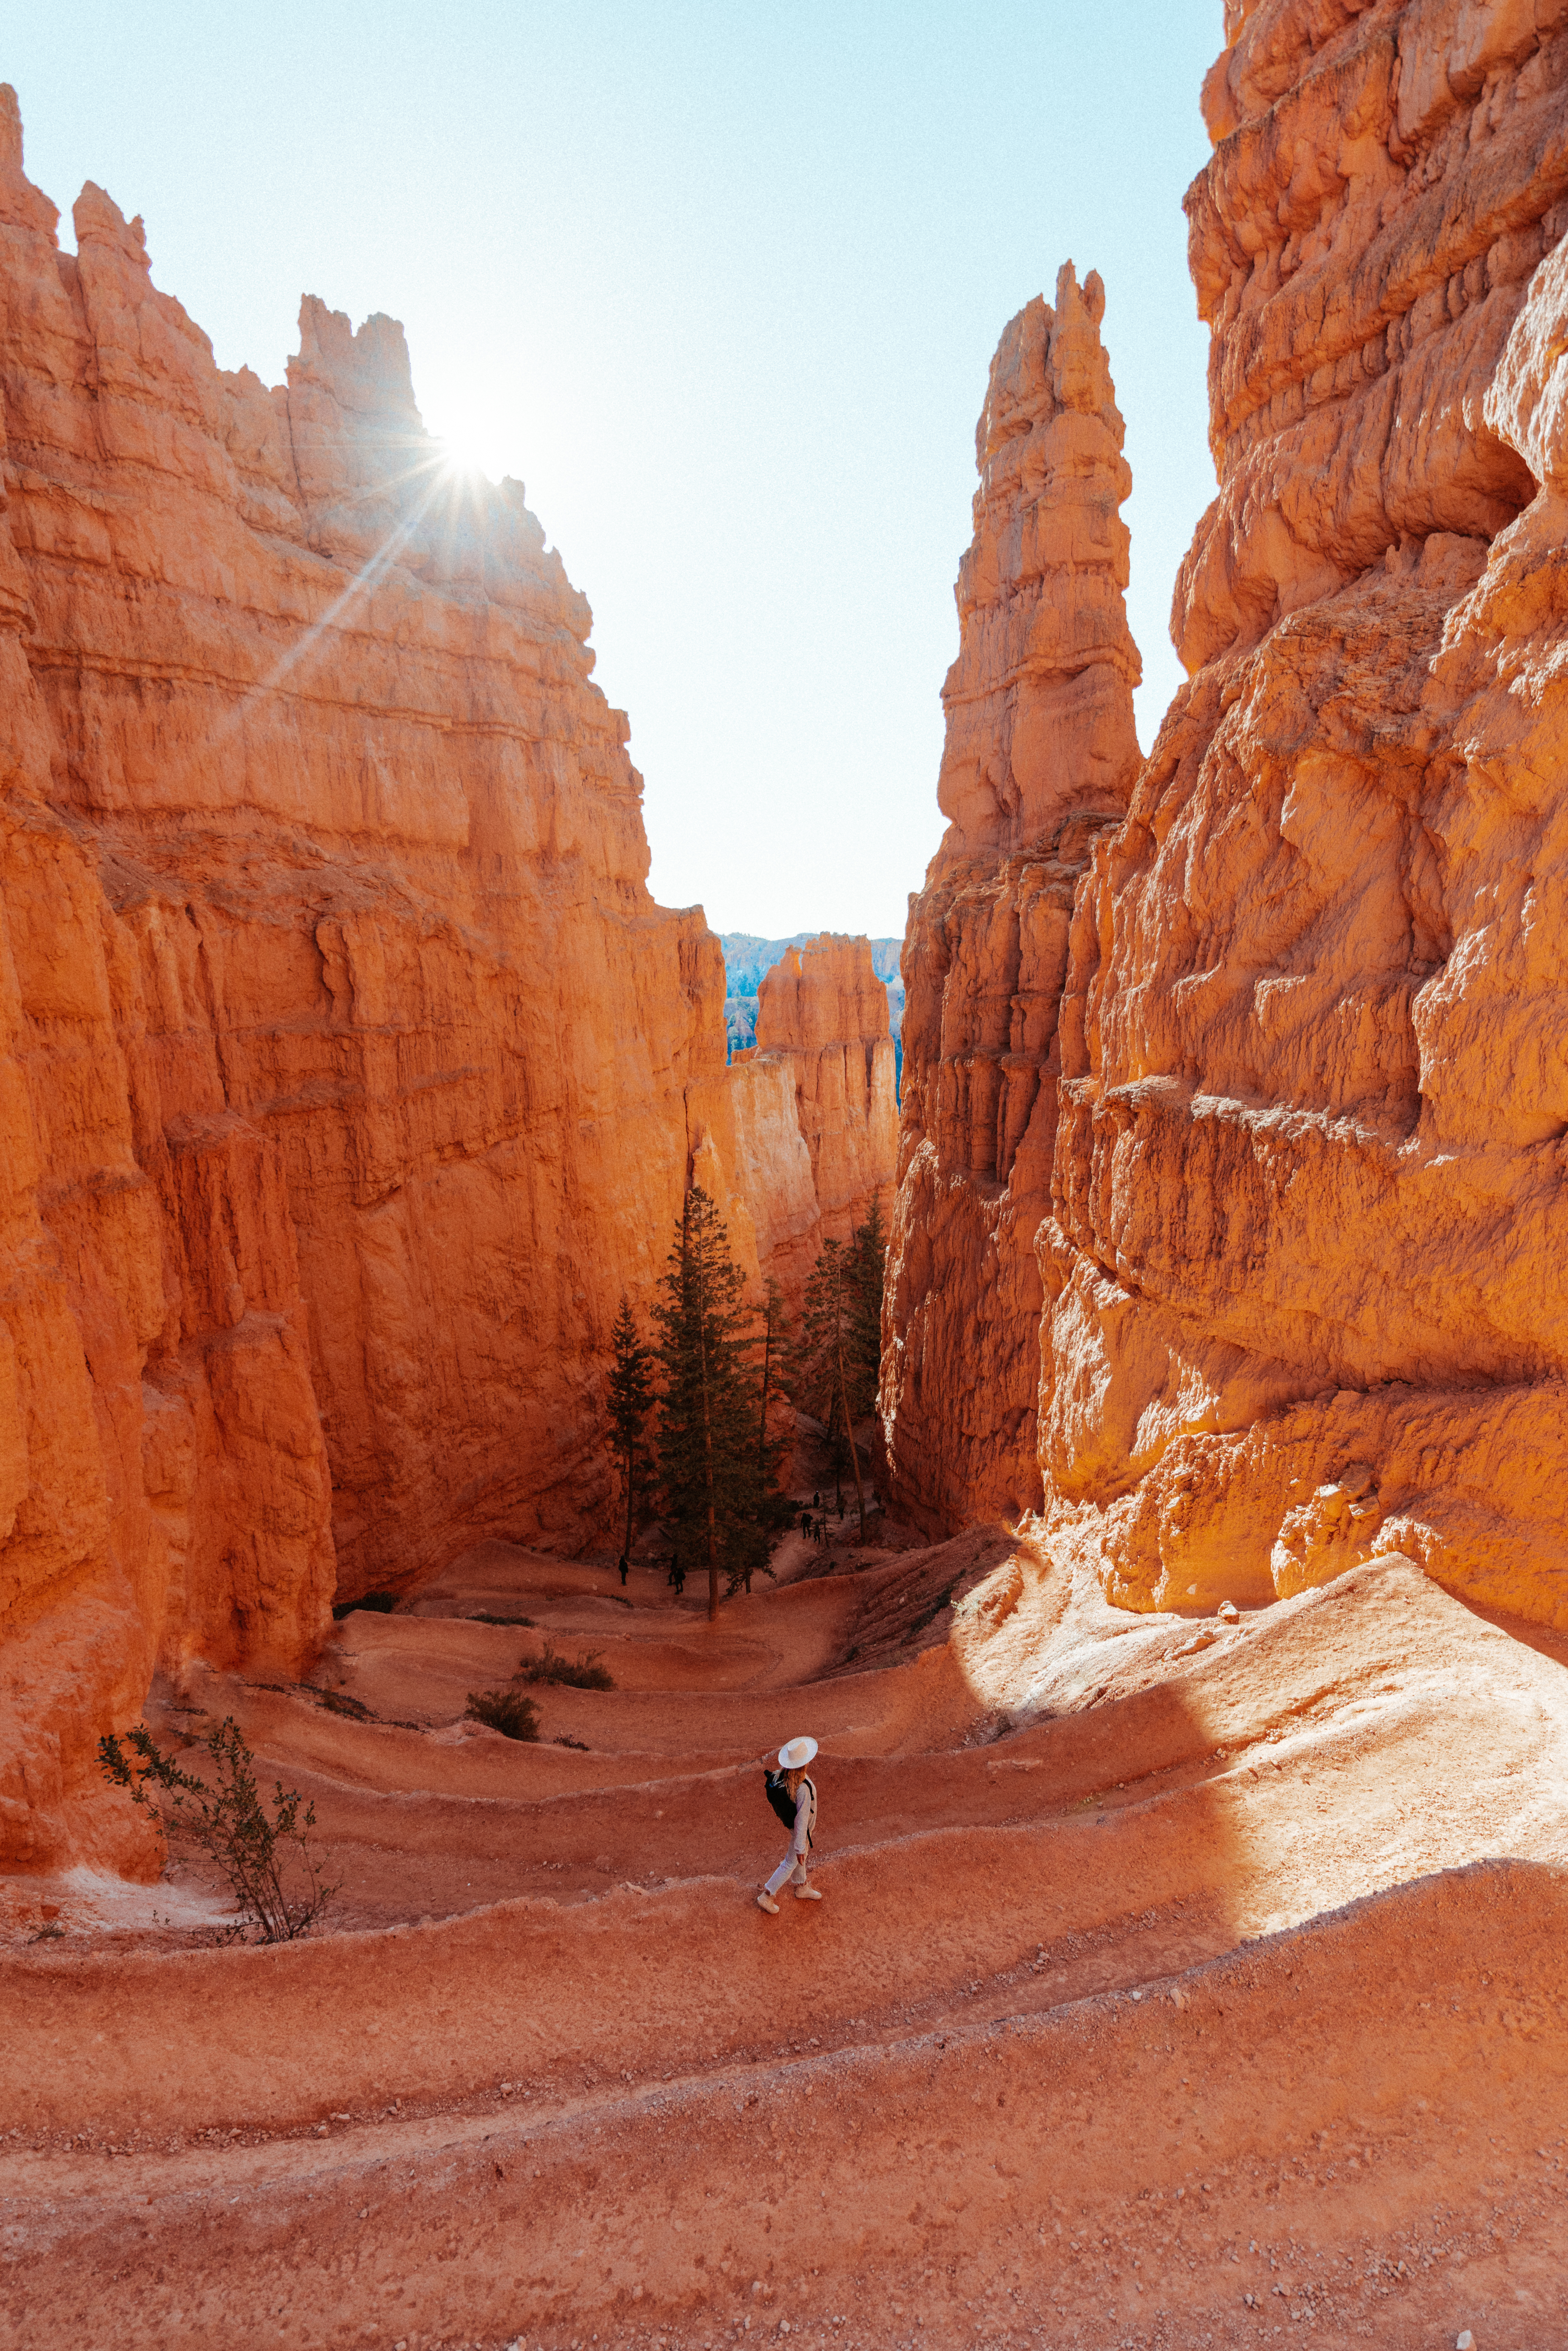 Sarah on the trail in Bryce Canyon, Utah